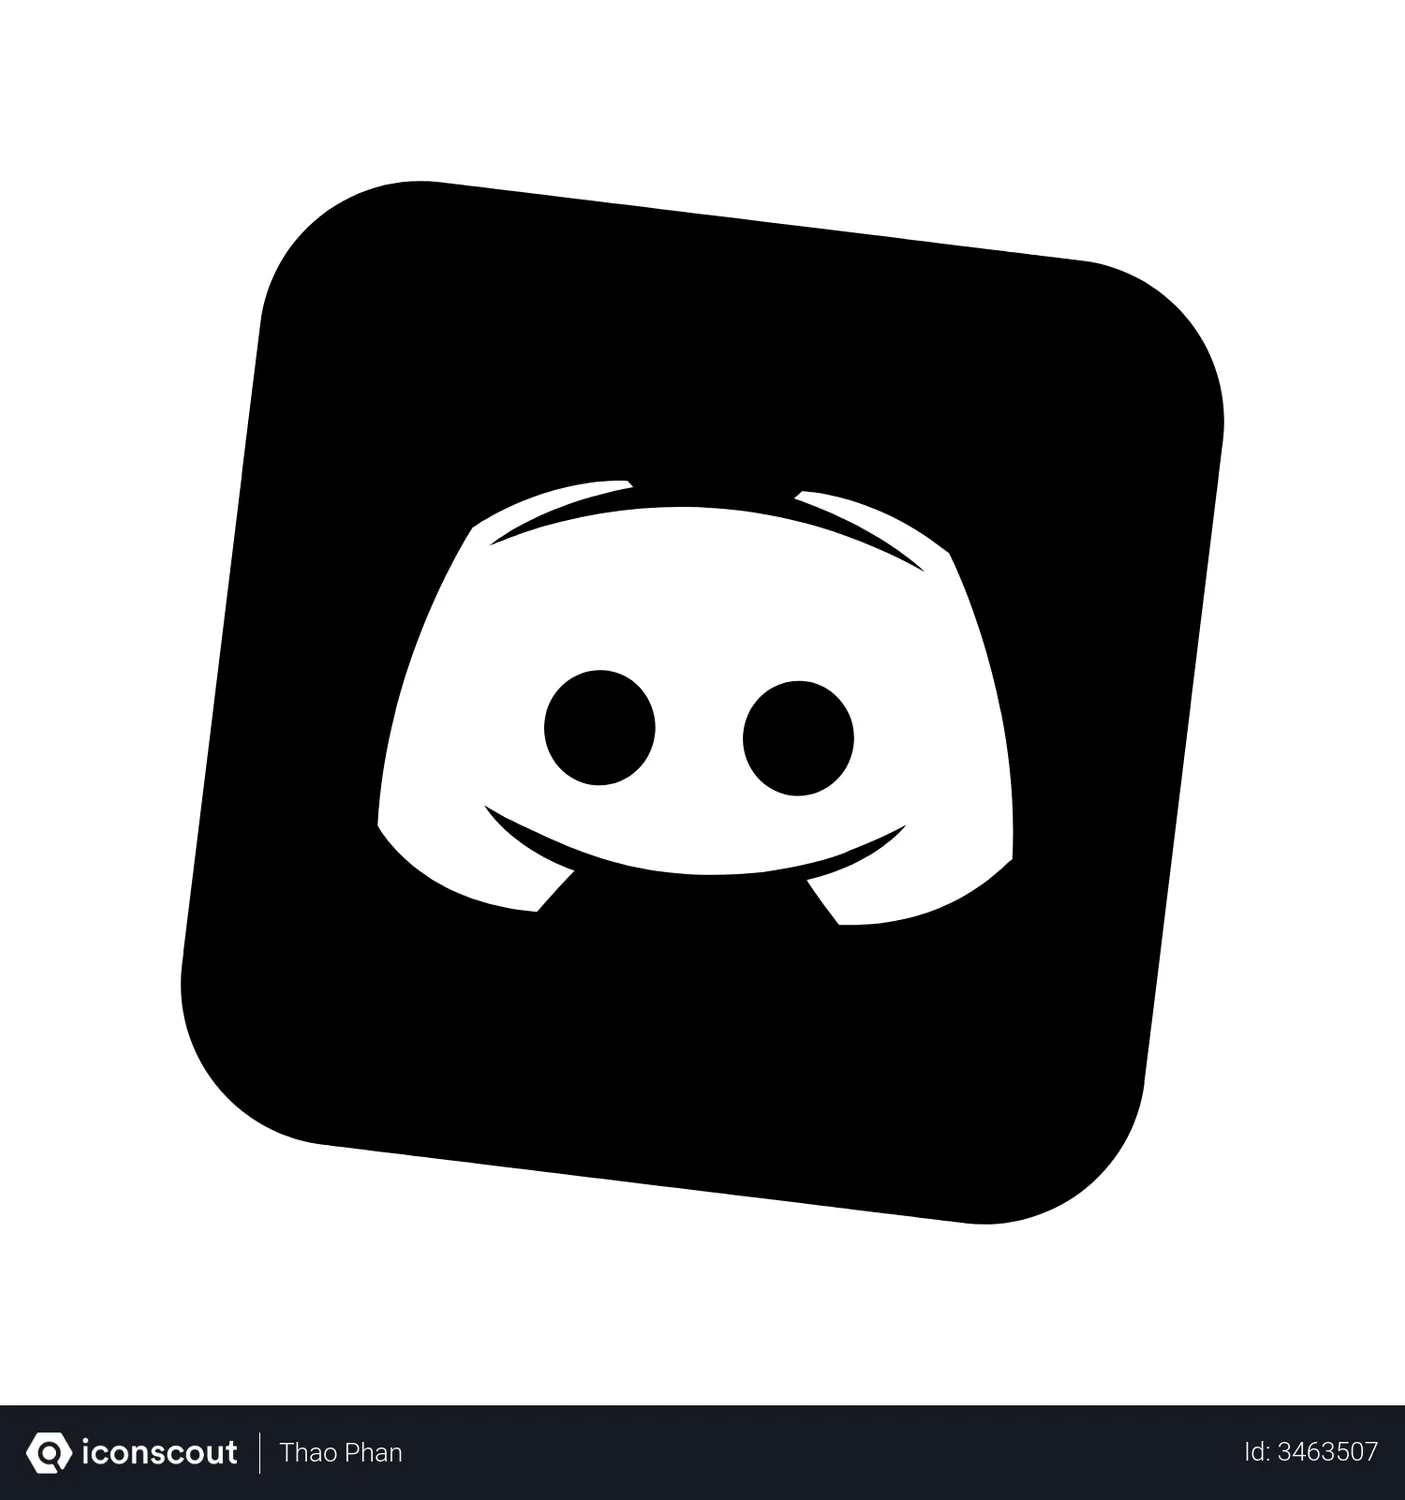 Discord Logo Animated Icon download in JSON, LOTTIE or MP4 format